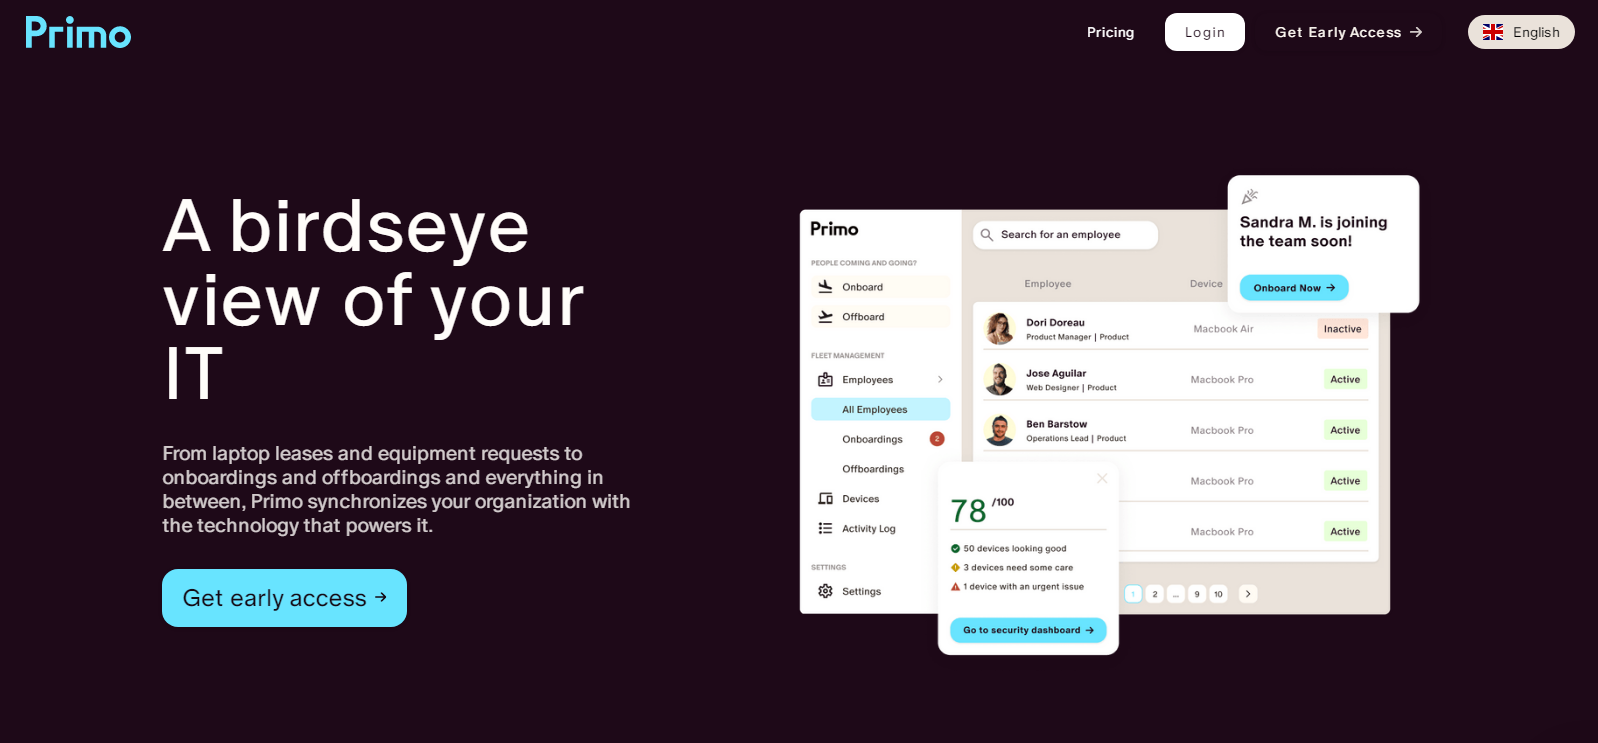 Primo, an IT Platform for SMBs Raises $3.4M in a Seed Funding Round.